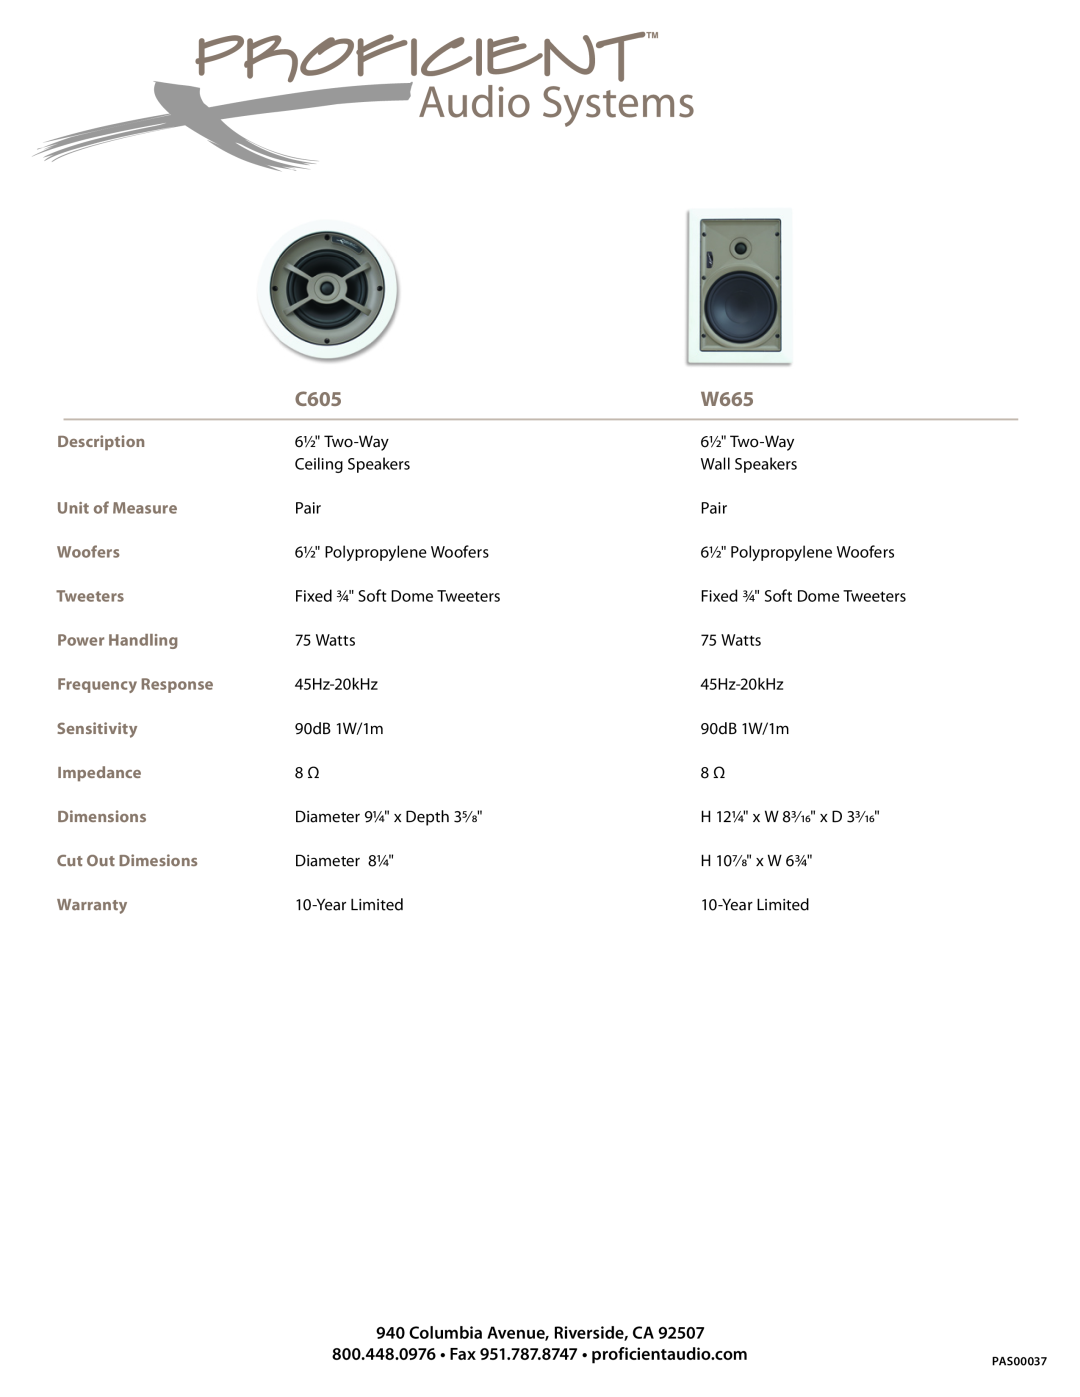 Proficient Audio Systems W665 specifications C605 